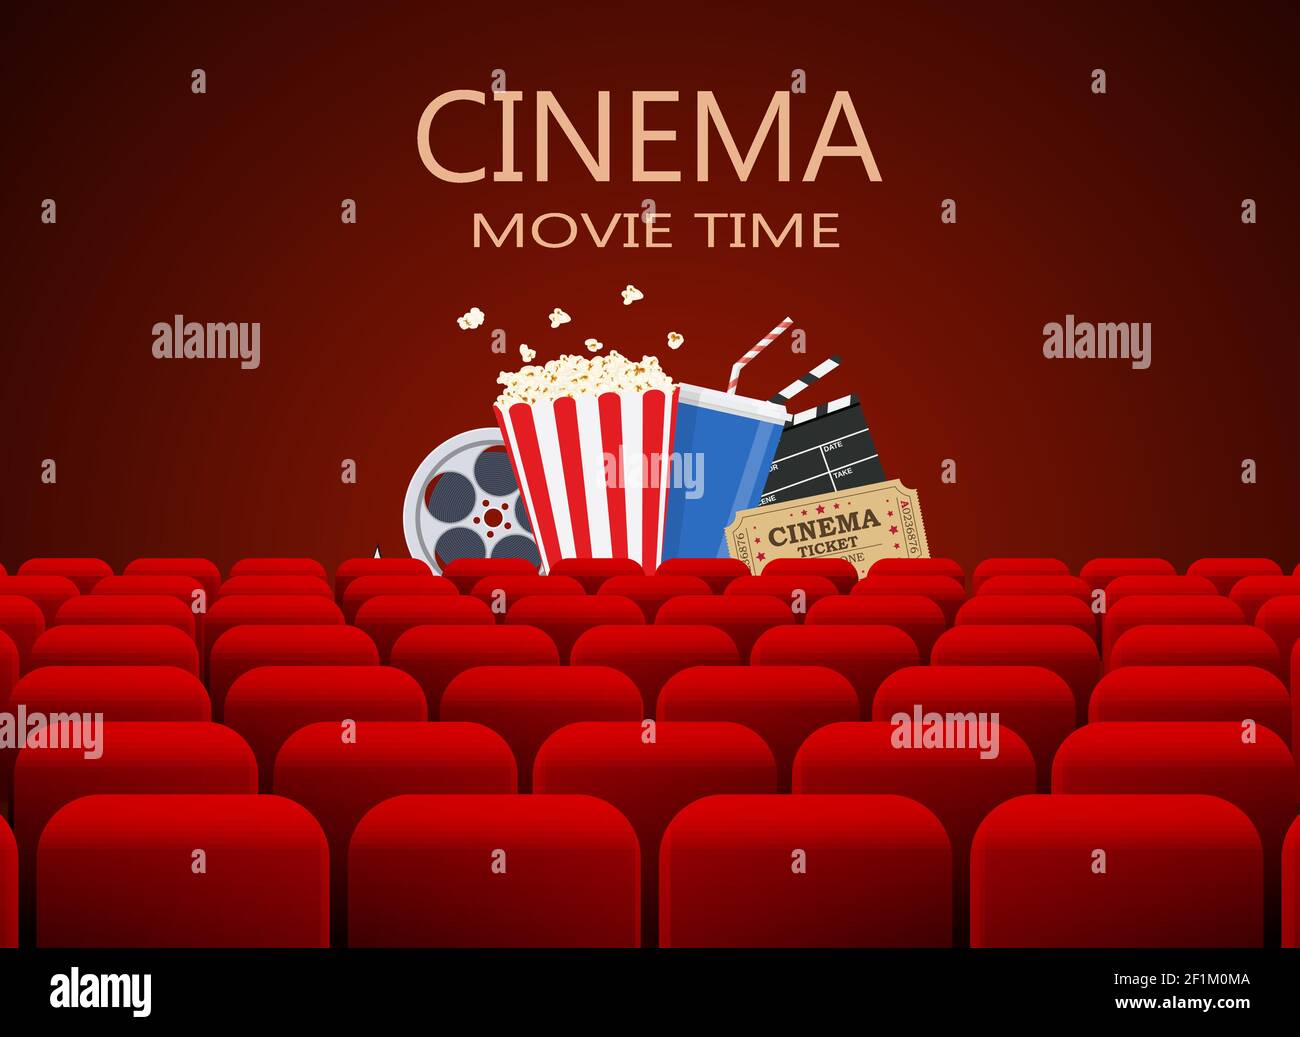 Movie theater with row of red seats Stock Vector